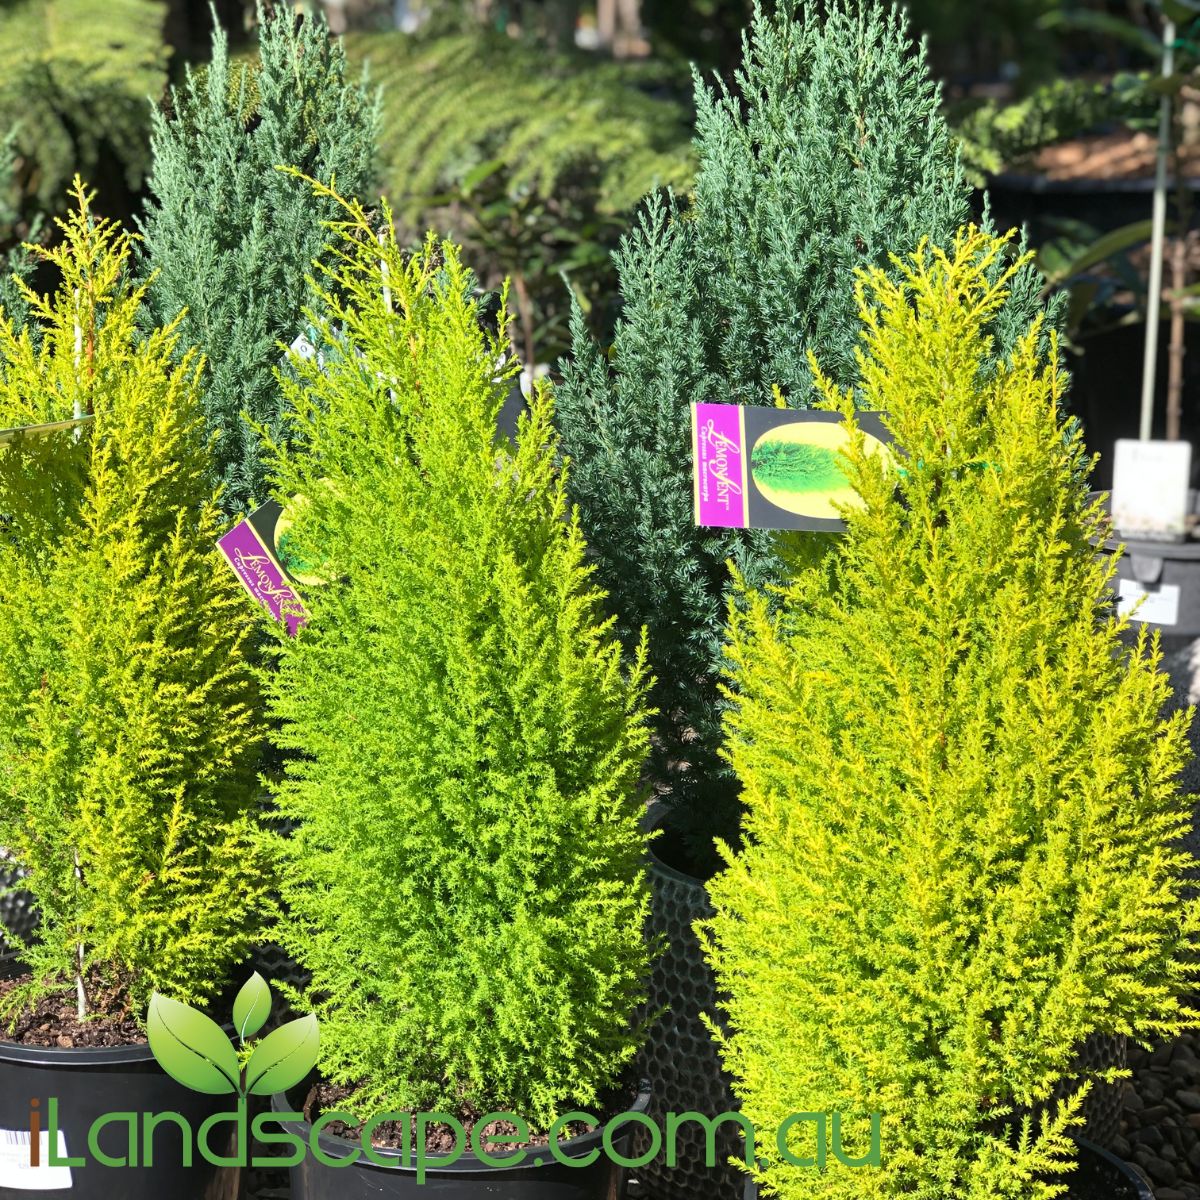 Cupressus Lemon Scents is a hardy evergreen conifer that has bright golden lemon scented yellow foliage   Grows approx 2.5m tall x 1-1.5m wide   grows best in a well ventilated areas in free draining soils and in full sun   water well in dry conditions and mulch the surrounding areas 